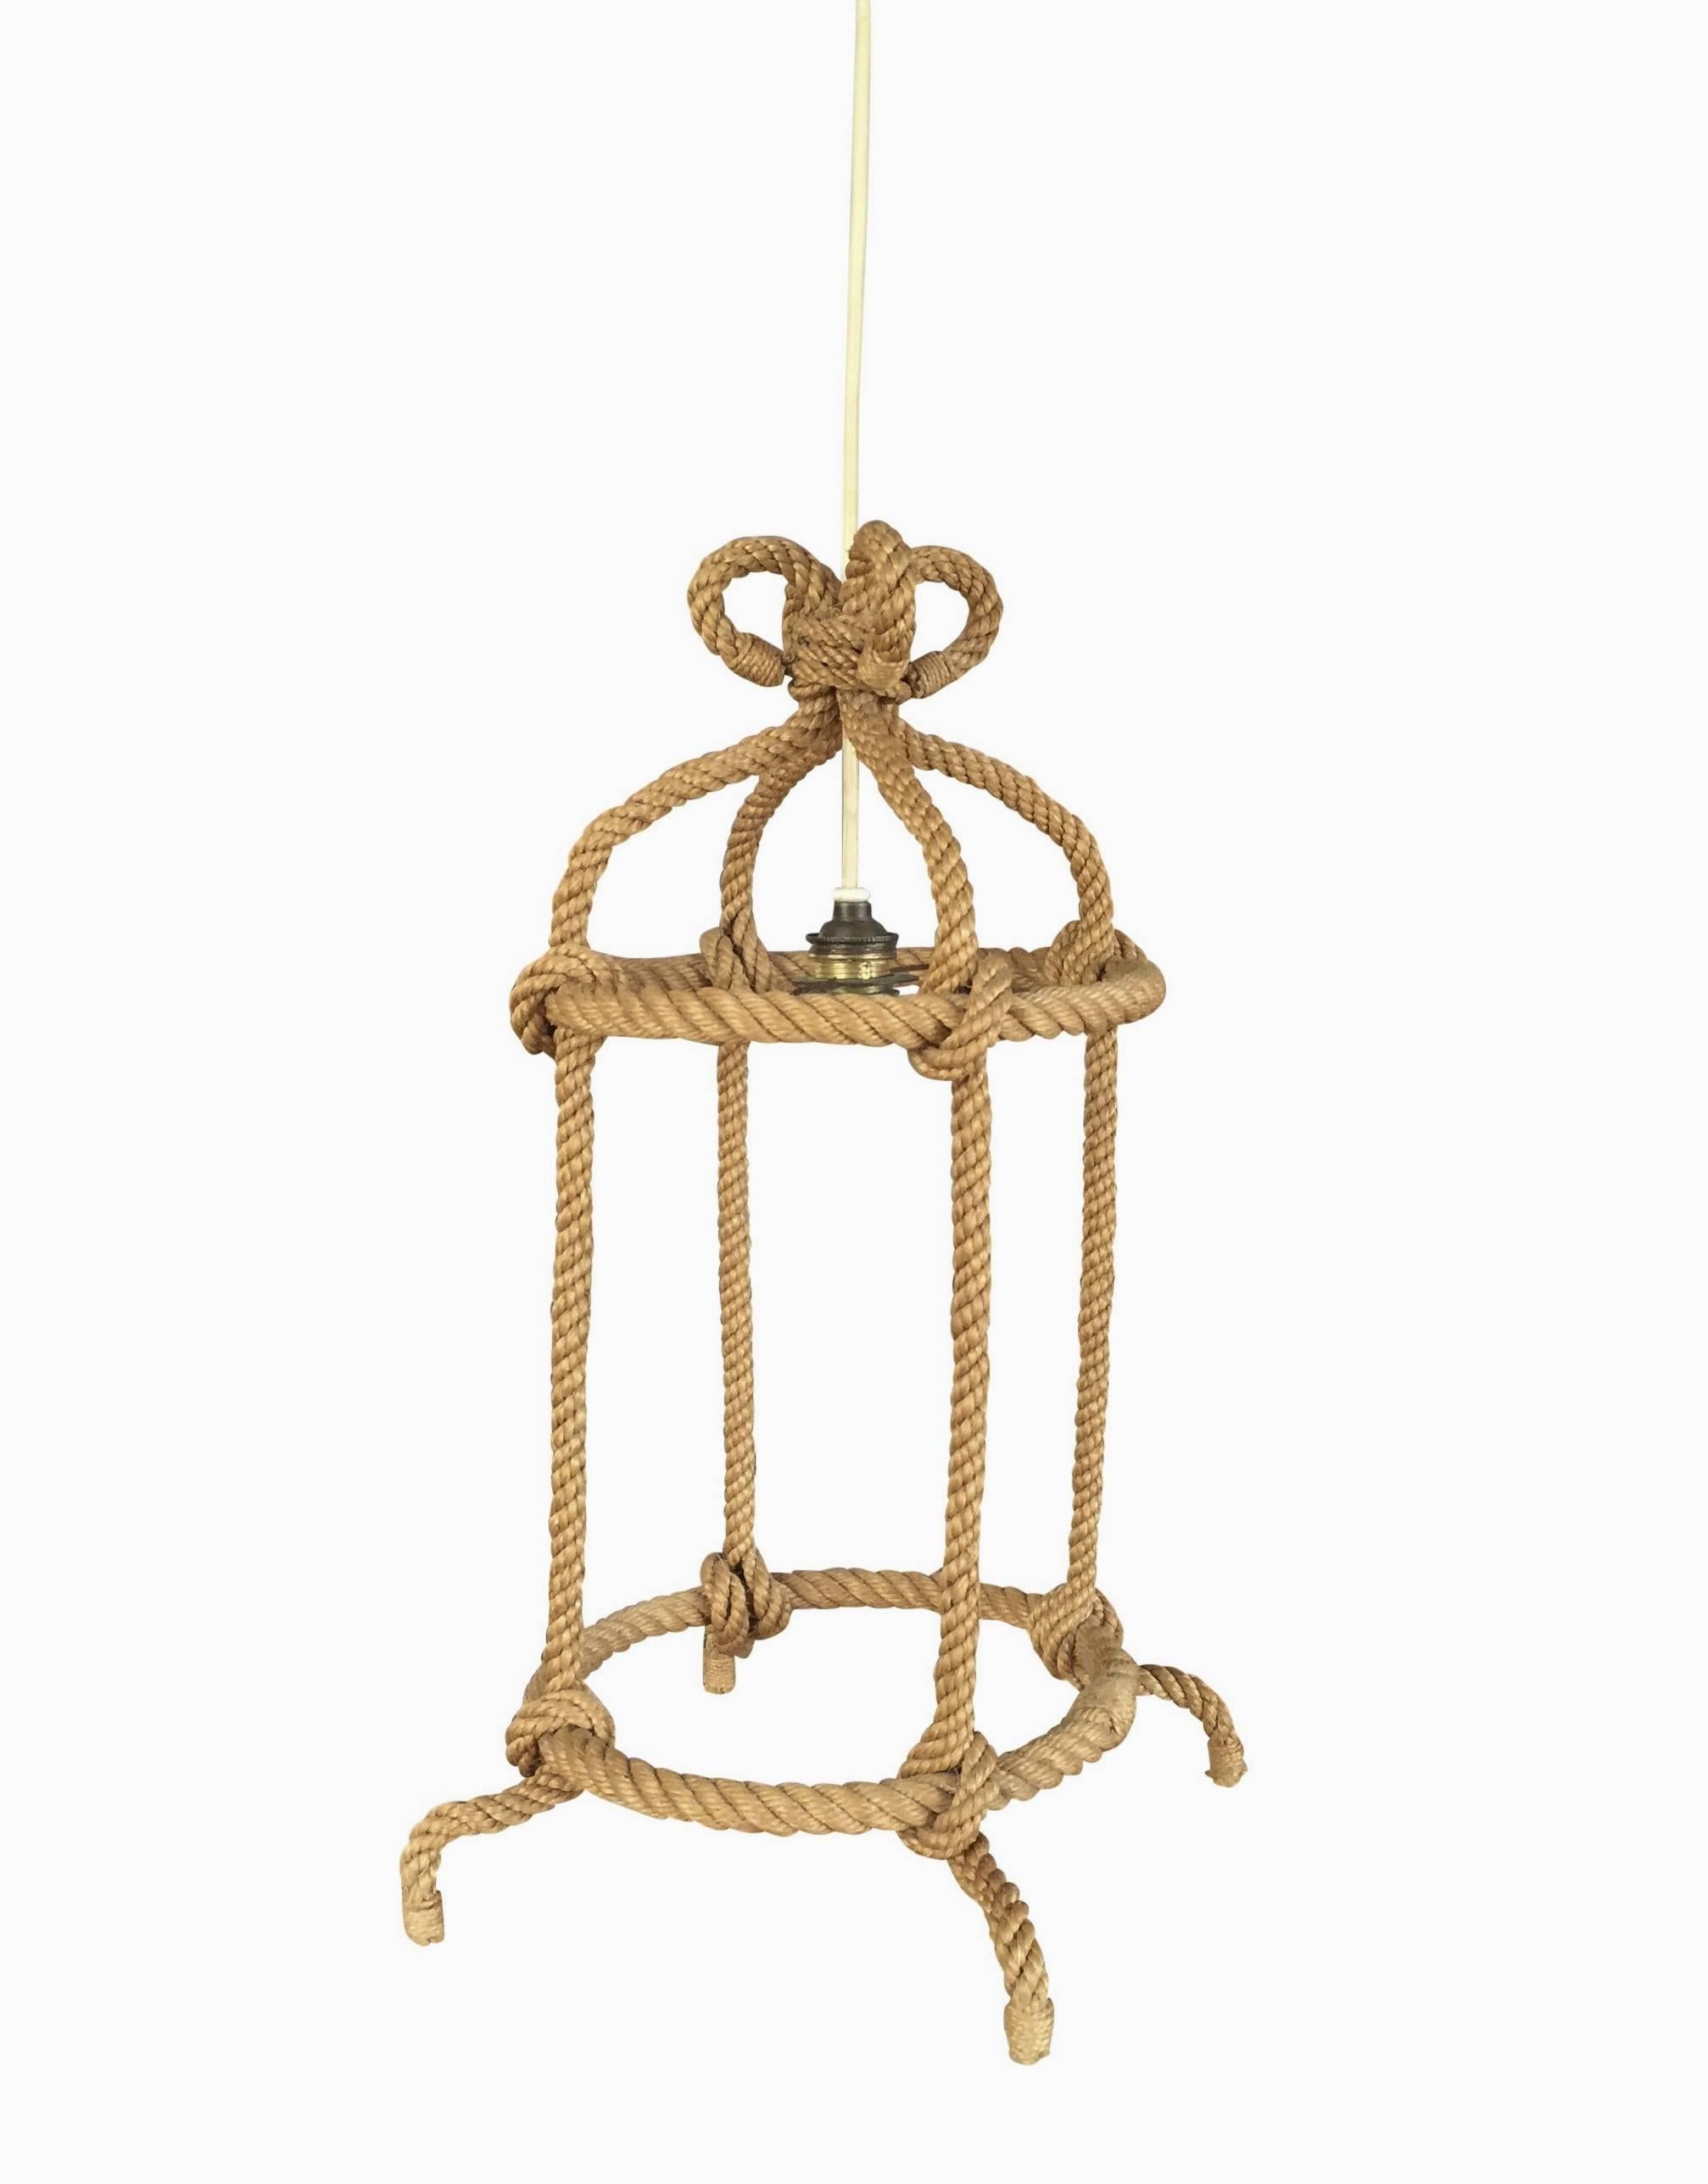 Audoux Minnet petite chandelier.
European socket and wiring.
This item will ship from France.
Price does not include handling, shipping and possible customs related charges.
Good vintage condition.
This item can be returned to either Paris or